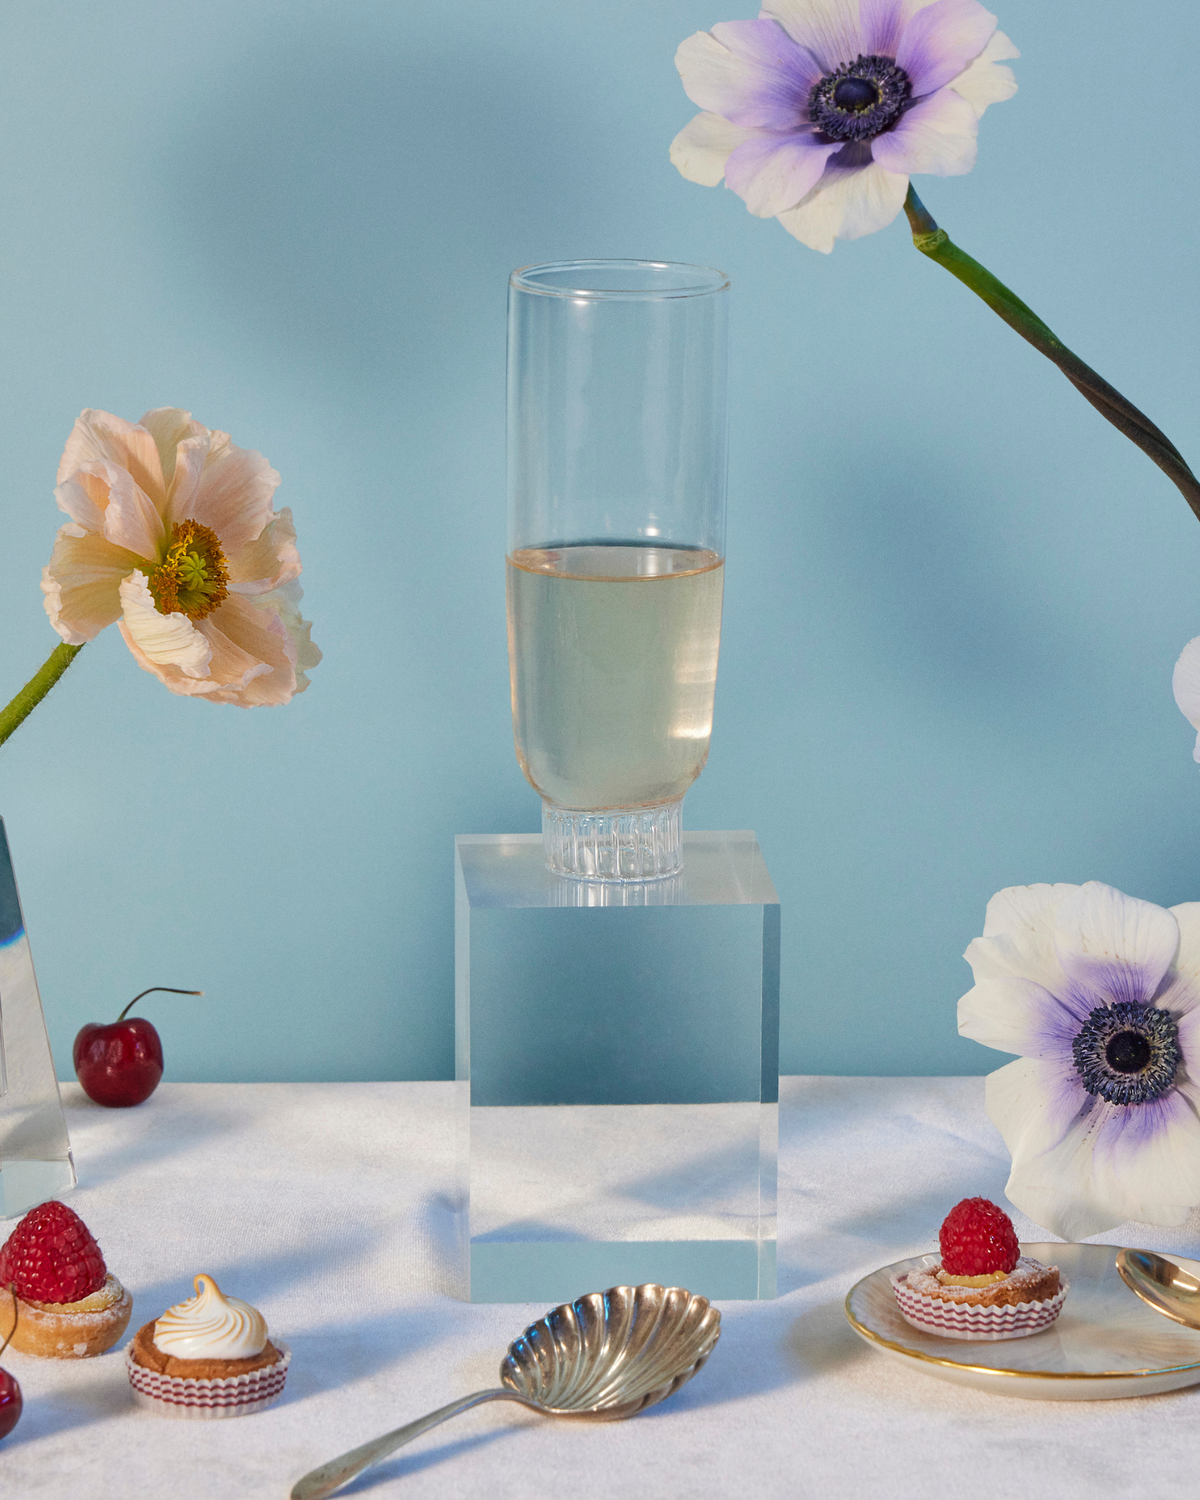 Sprezz's borosilicate glass champagne flute, amid an elegant table setting with pale pink poppies and purple-centered anemones in glass vases, fresh strawberries, cherries, and delicate pastries on a gold-accented white tablecloth with a serene blue backdrop.These durable, thermal shock-resistant glasses embody modern elegance, perfect for luxury dining and as the most thoughtful gifts for friends and family.